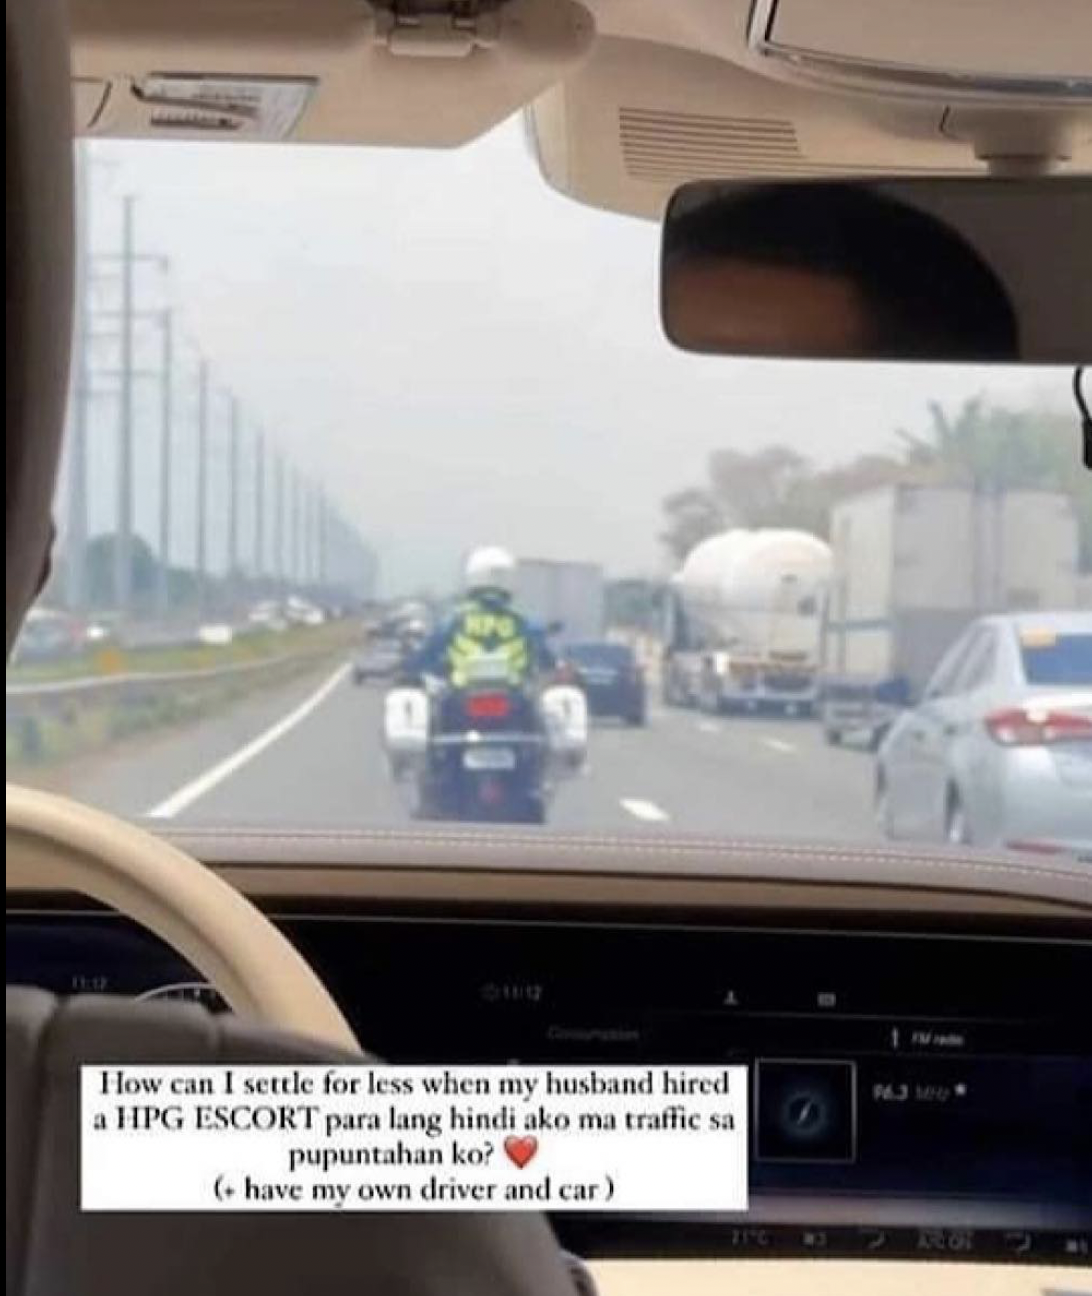 The Philippine National Police’s Highway Patrol Group (HPG) said that an investigation is underway following a viral social media post by a woman claiming her husband “hired” an HPG escort for her.